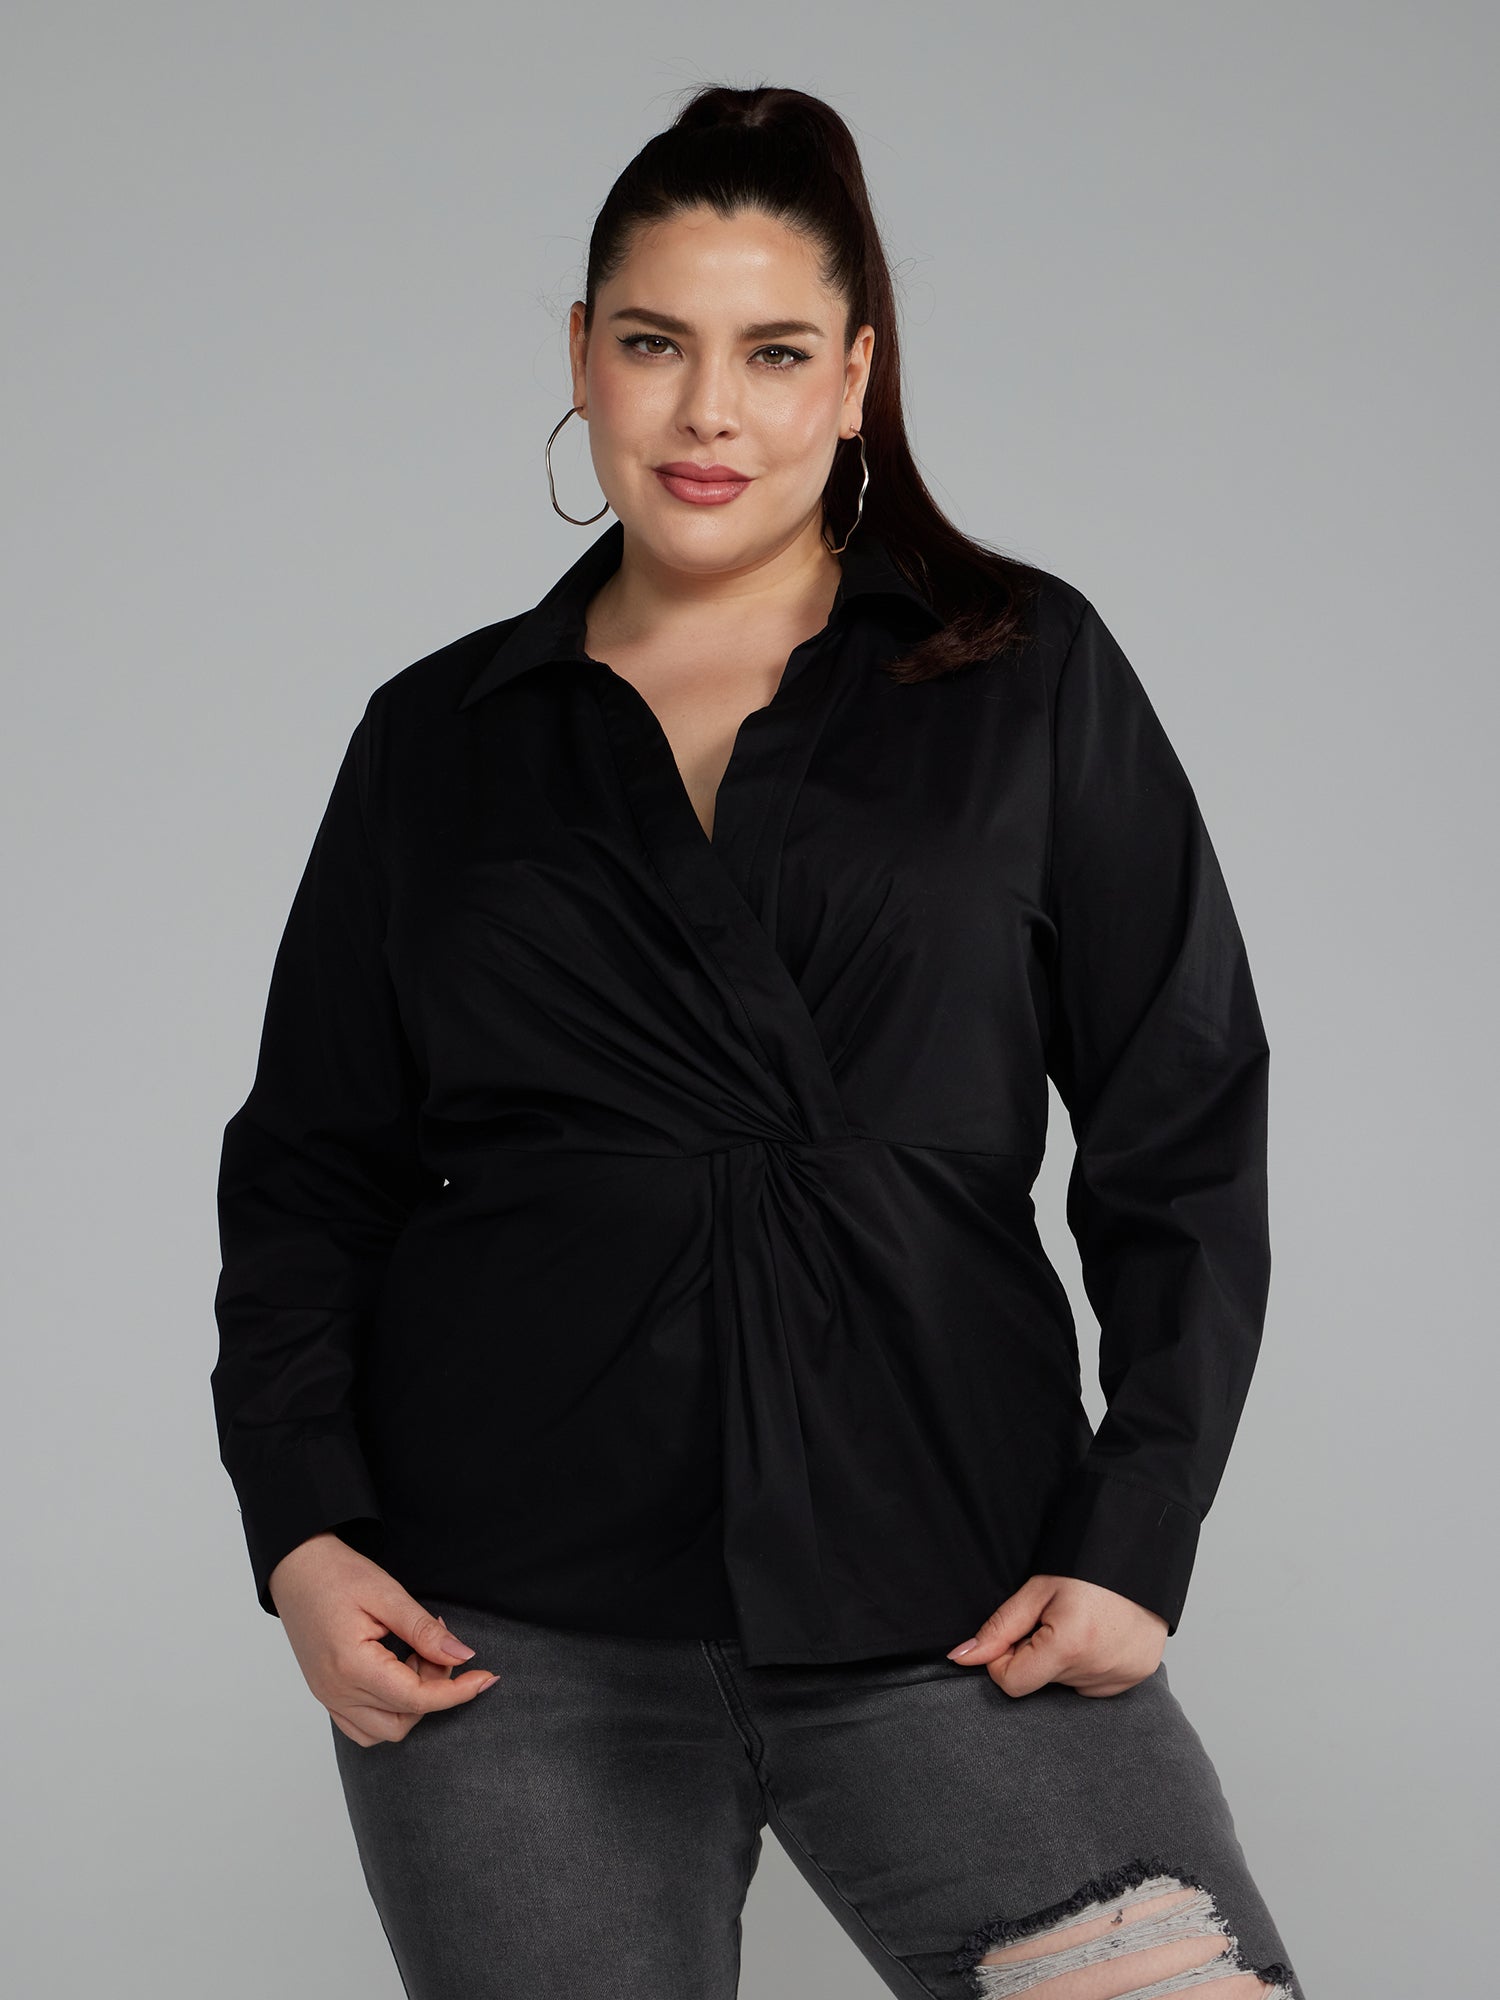 Plus Size All Tops